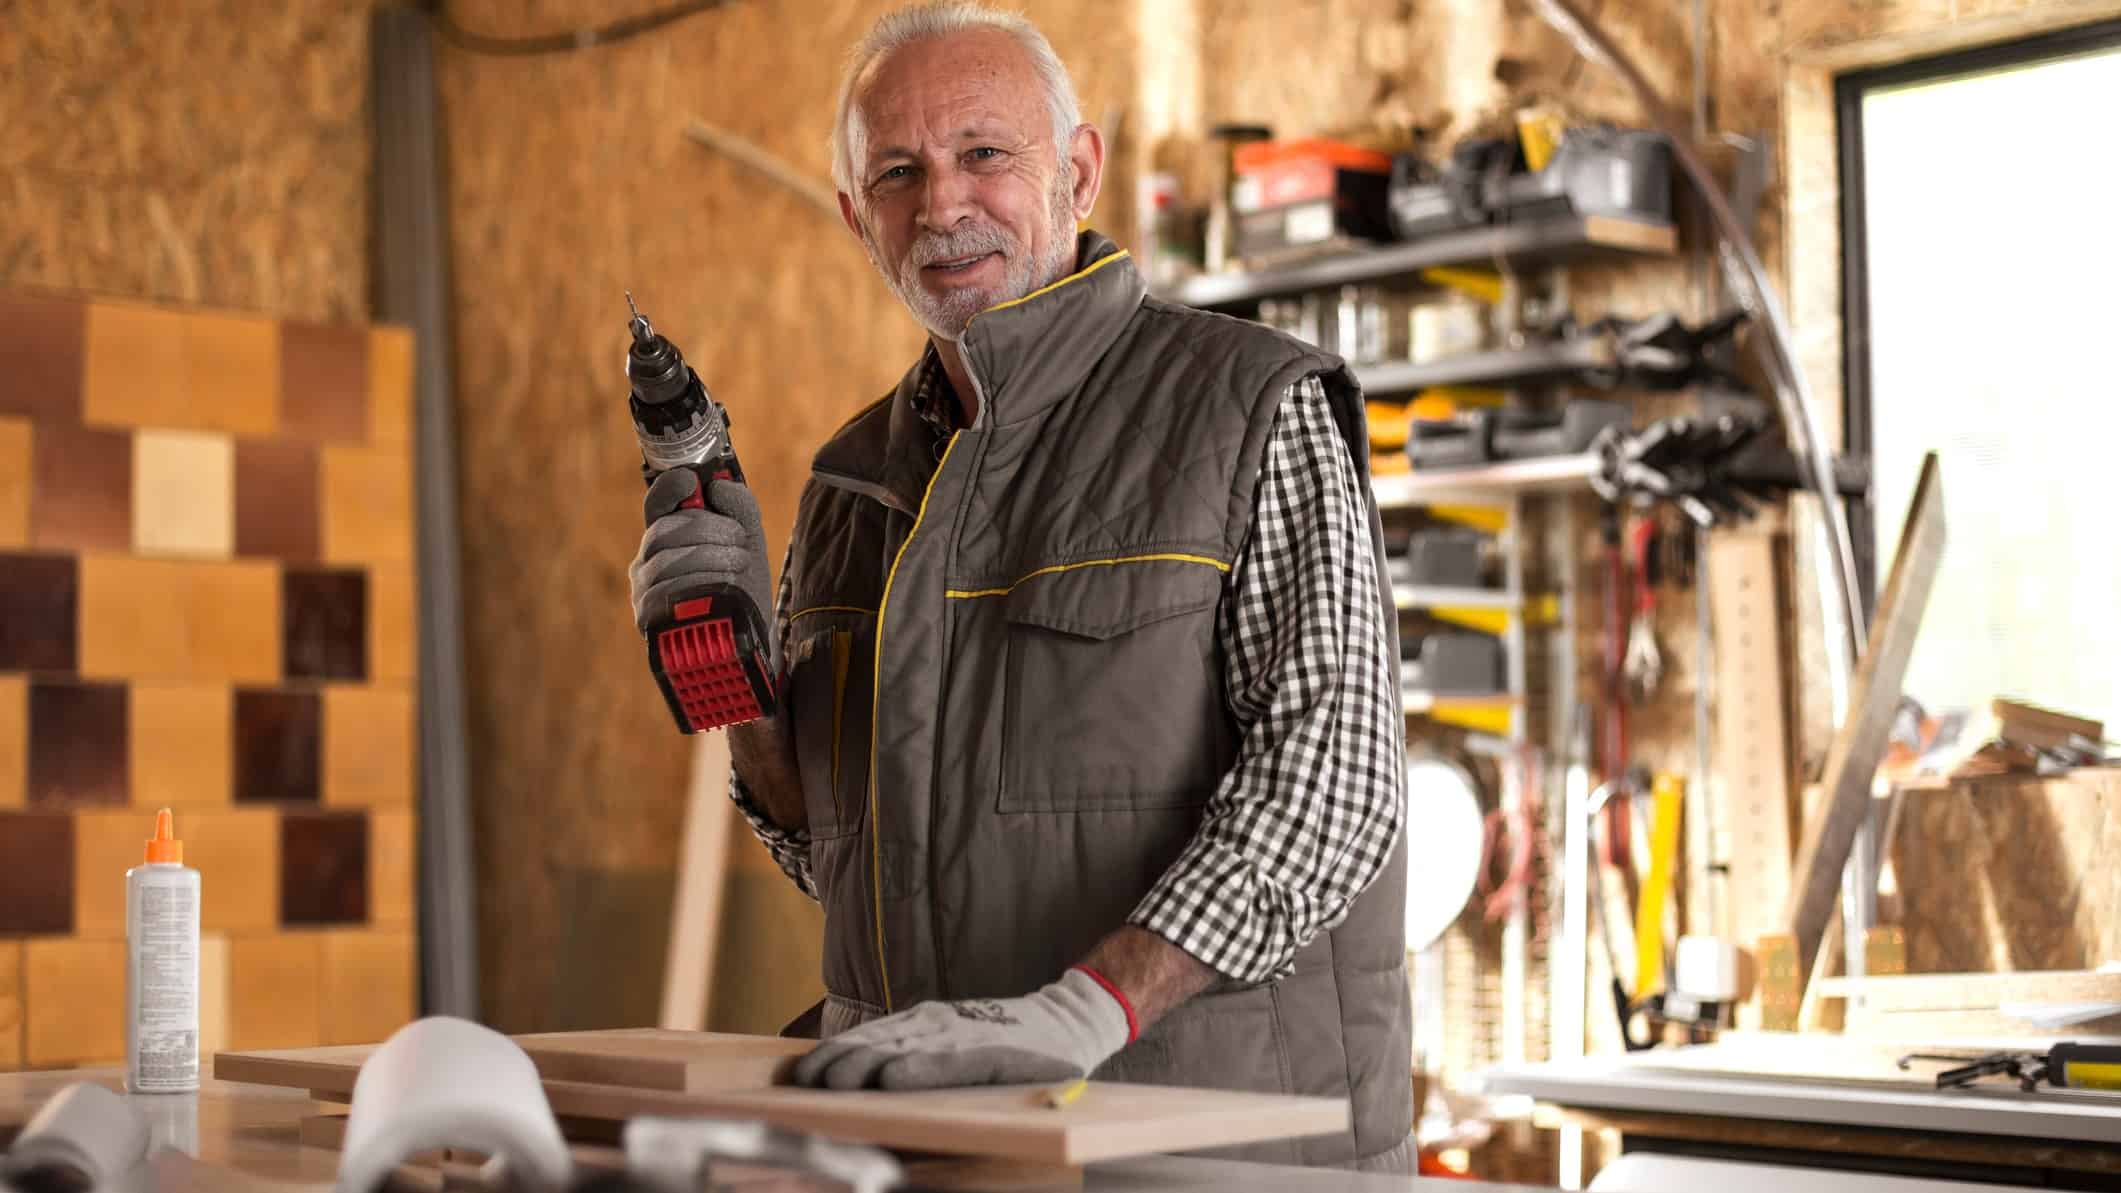 A man stands in his shed holding a cordless drill